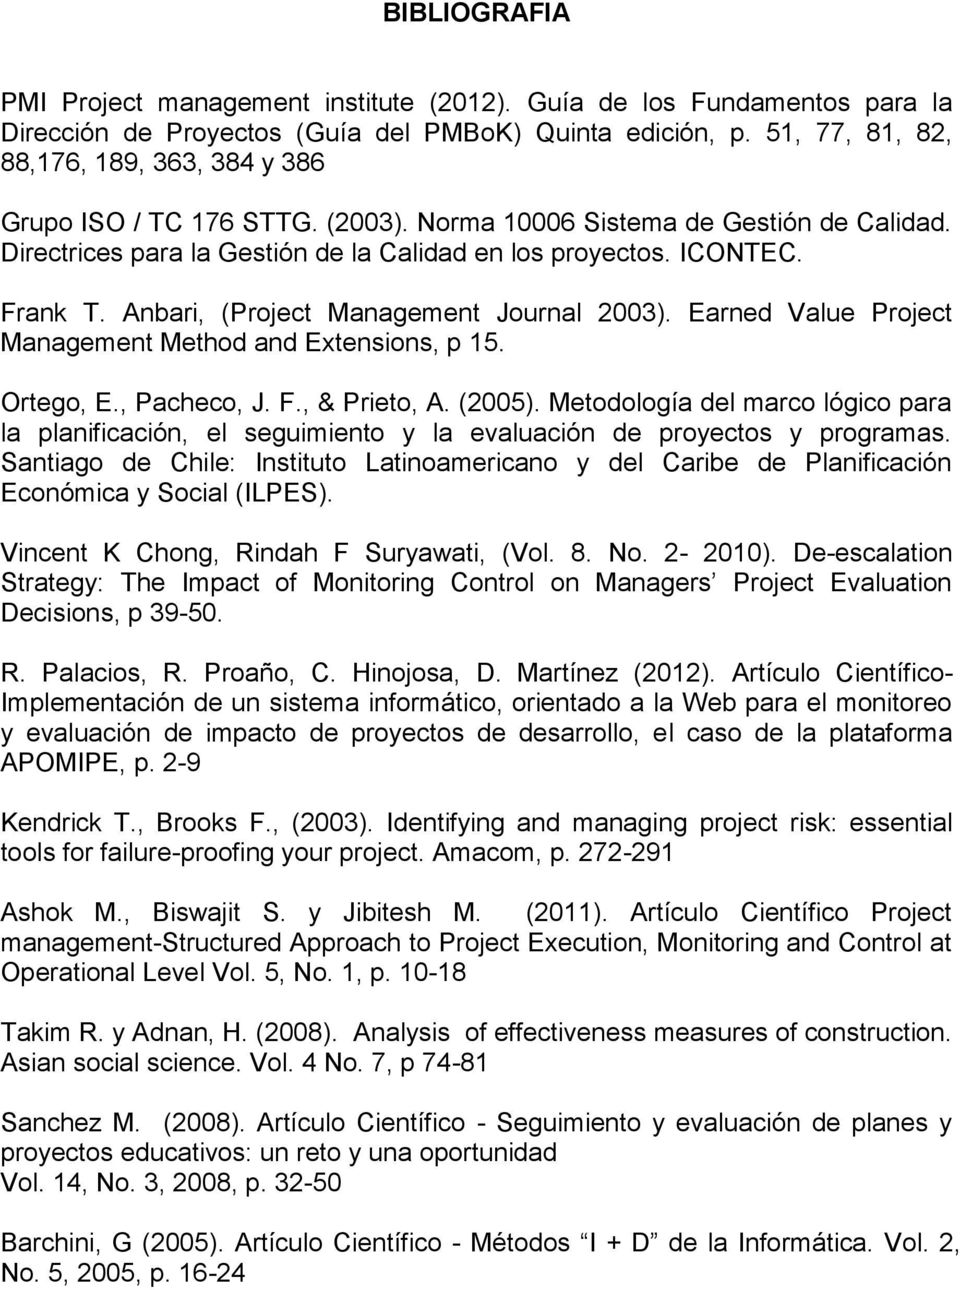 Anbari, (Project Management Journal 2003). Earned Value Project Management Method and Extensions, p 15. Ortego, E., Pacheco, J. F., & Prieto, A. (2005).